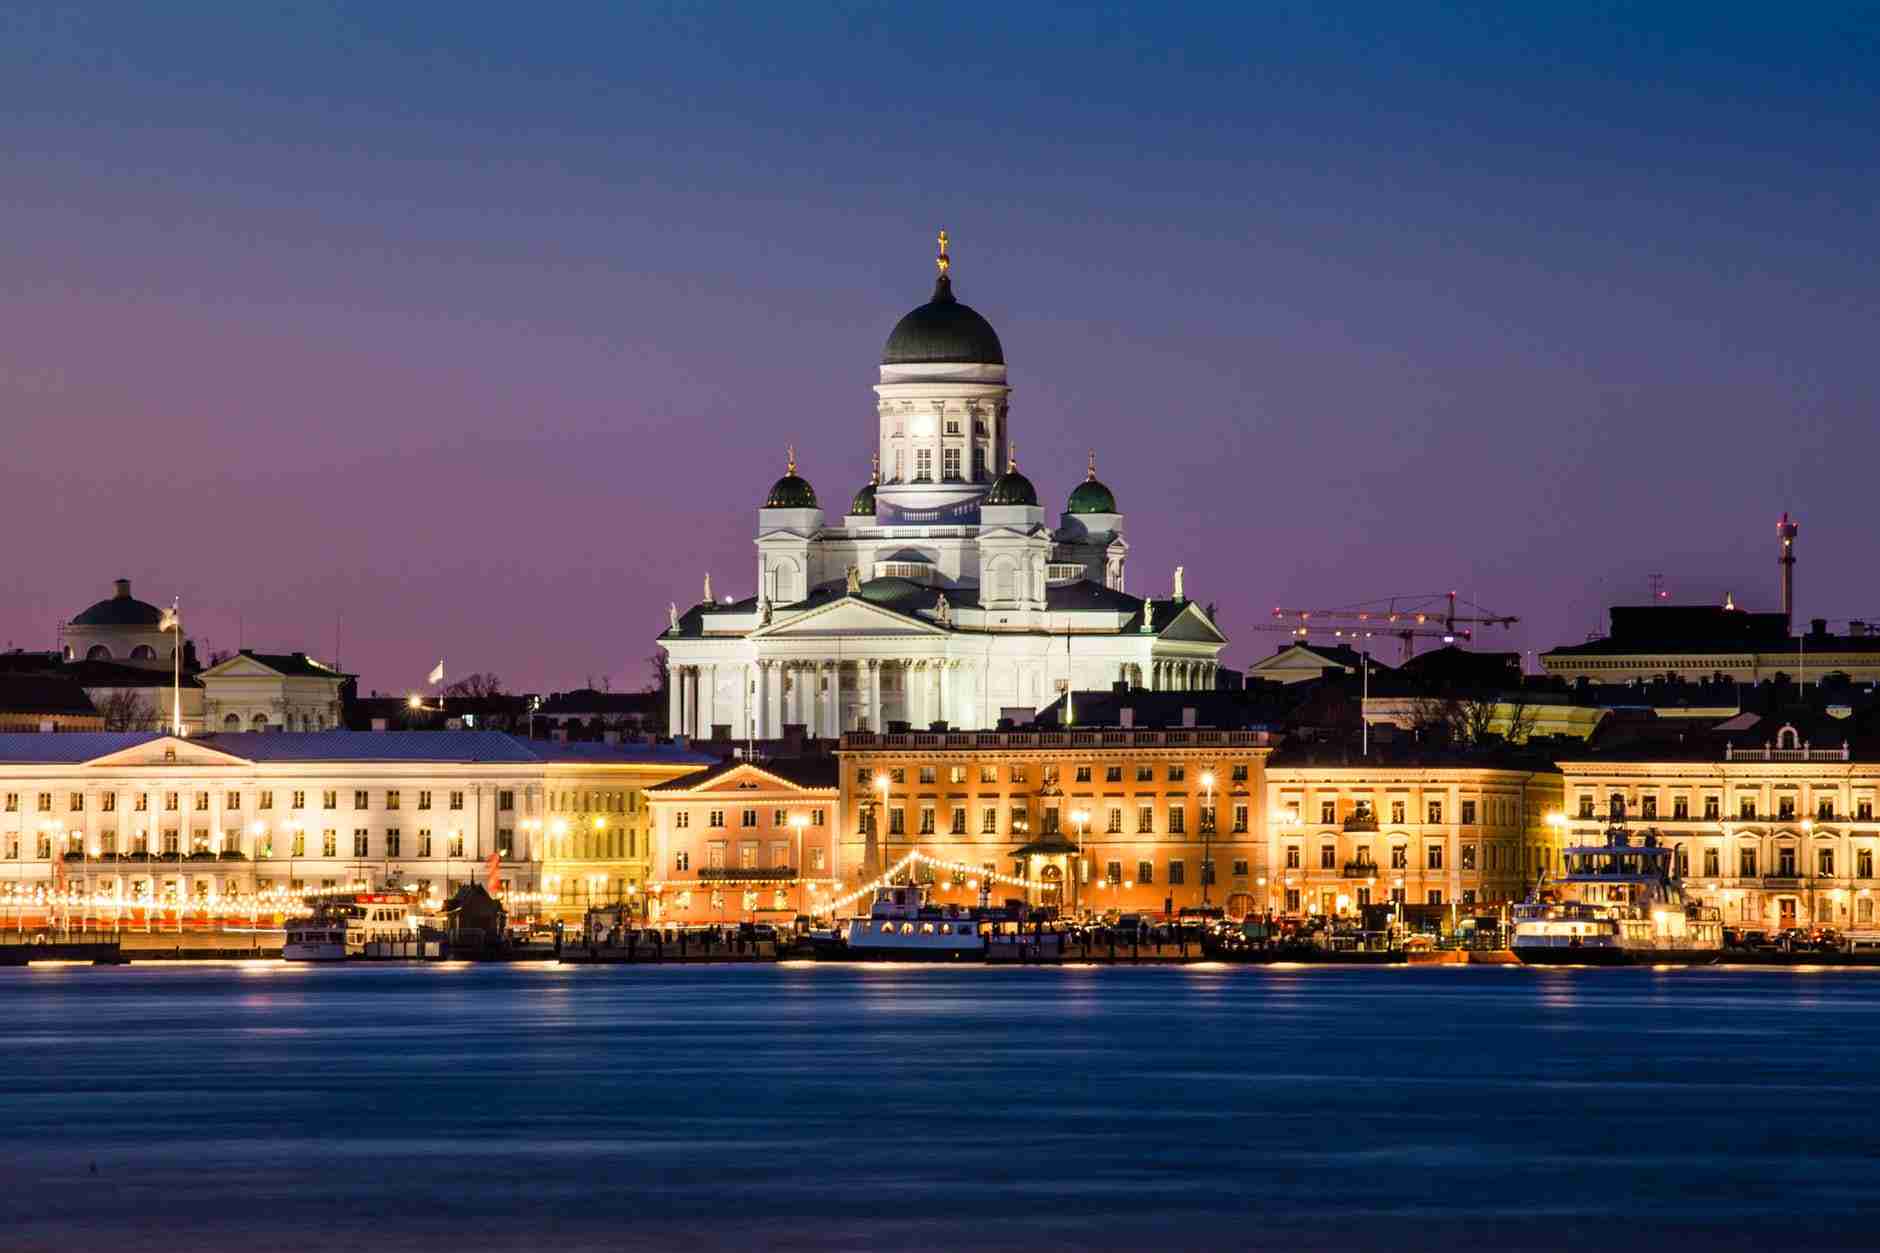 Are you Looking for a Digital Marketing Agency in Finland? Here are the top Companies